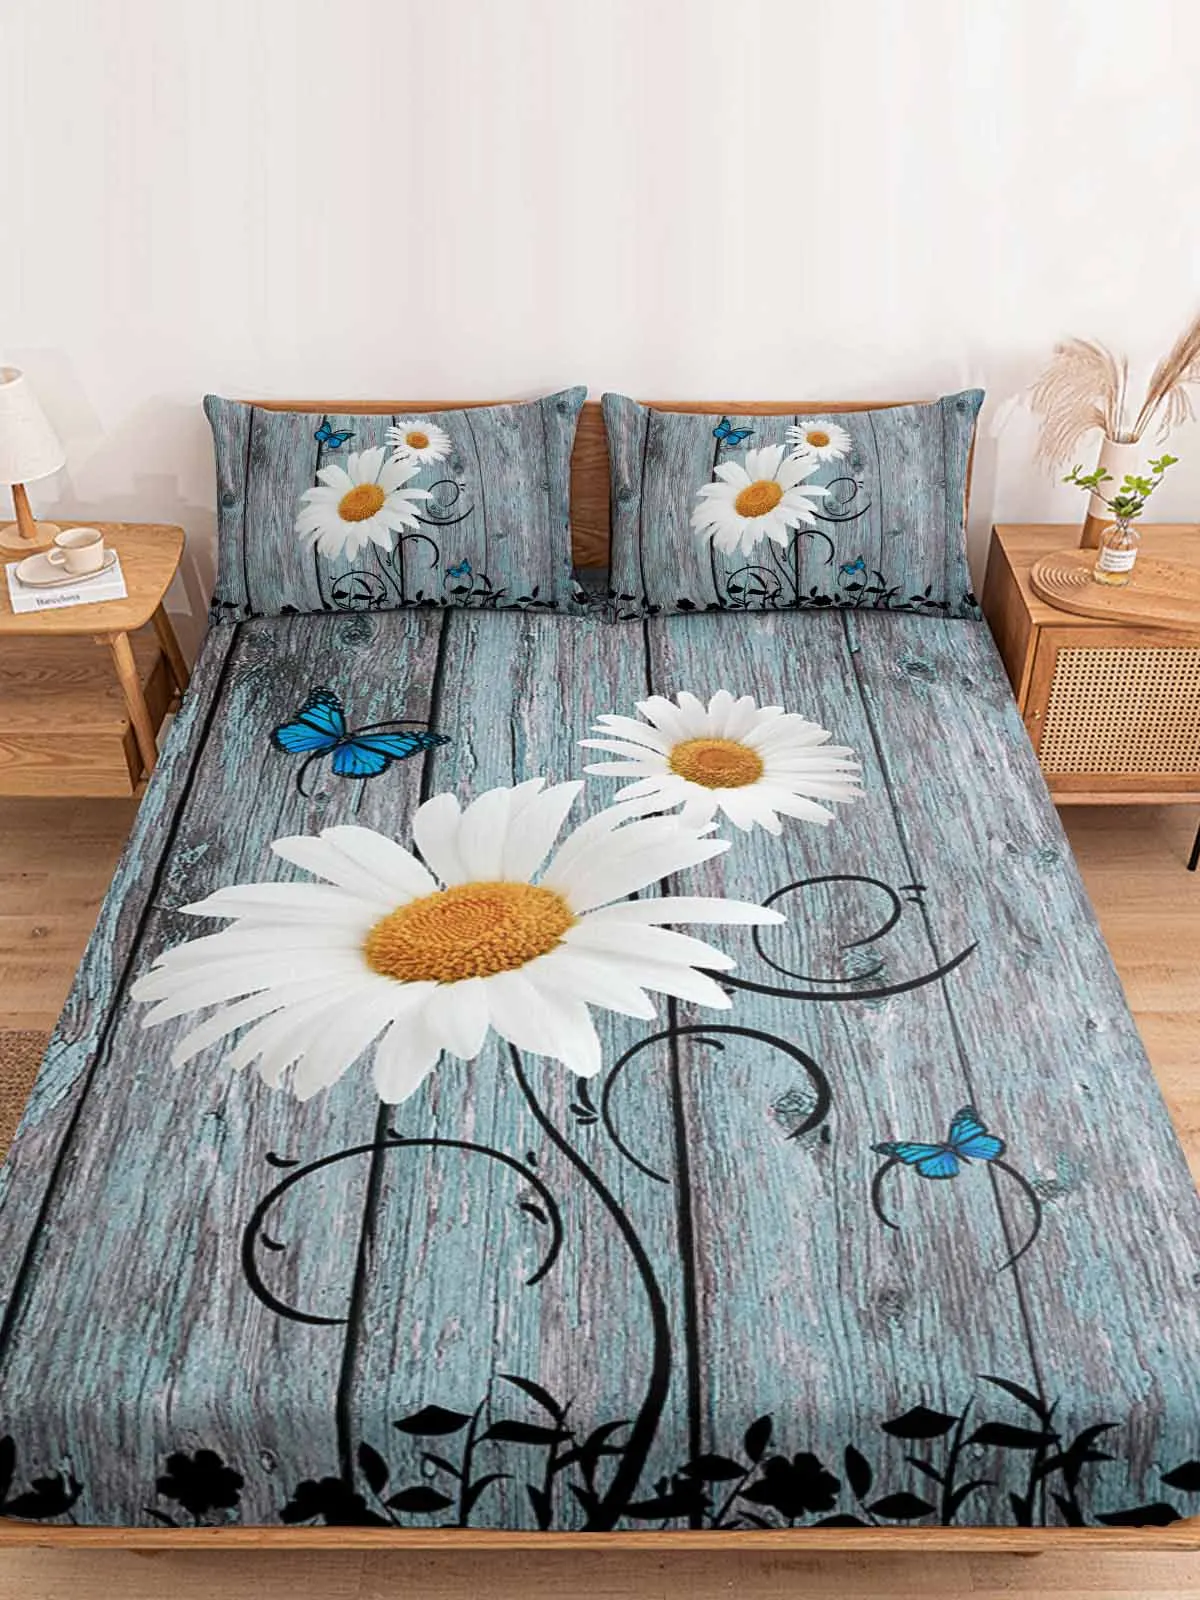 

Daisy Butterfly Wood Grain Polyester Fitted Sheet Mattress Cover Four Corners Elastic Band Bed Sheet Pilllowcase